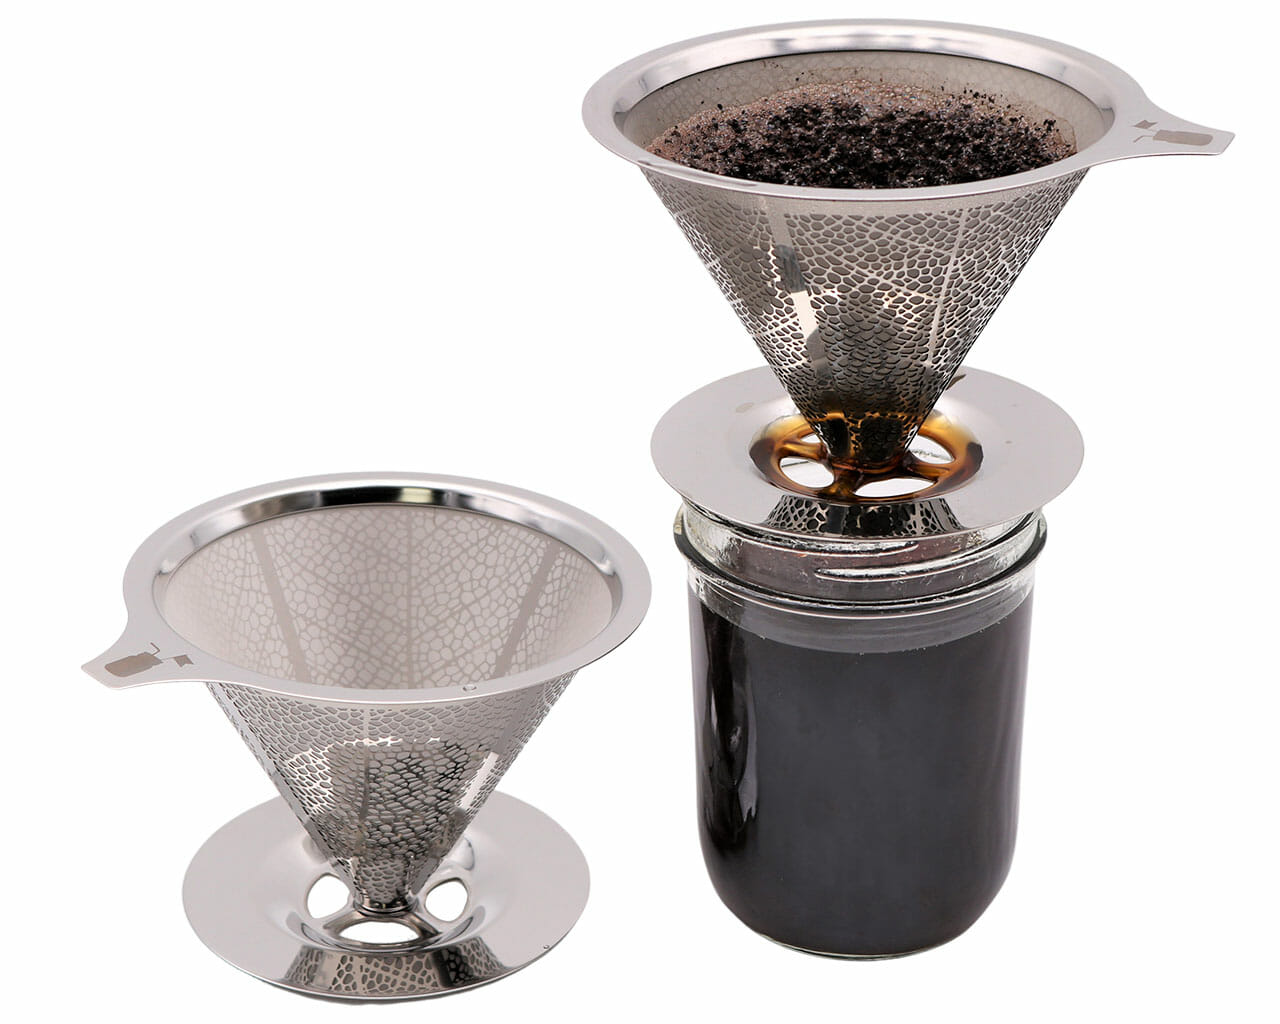 The 6 Best Reusable Coffee Filters of 2023